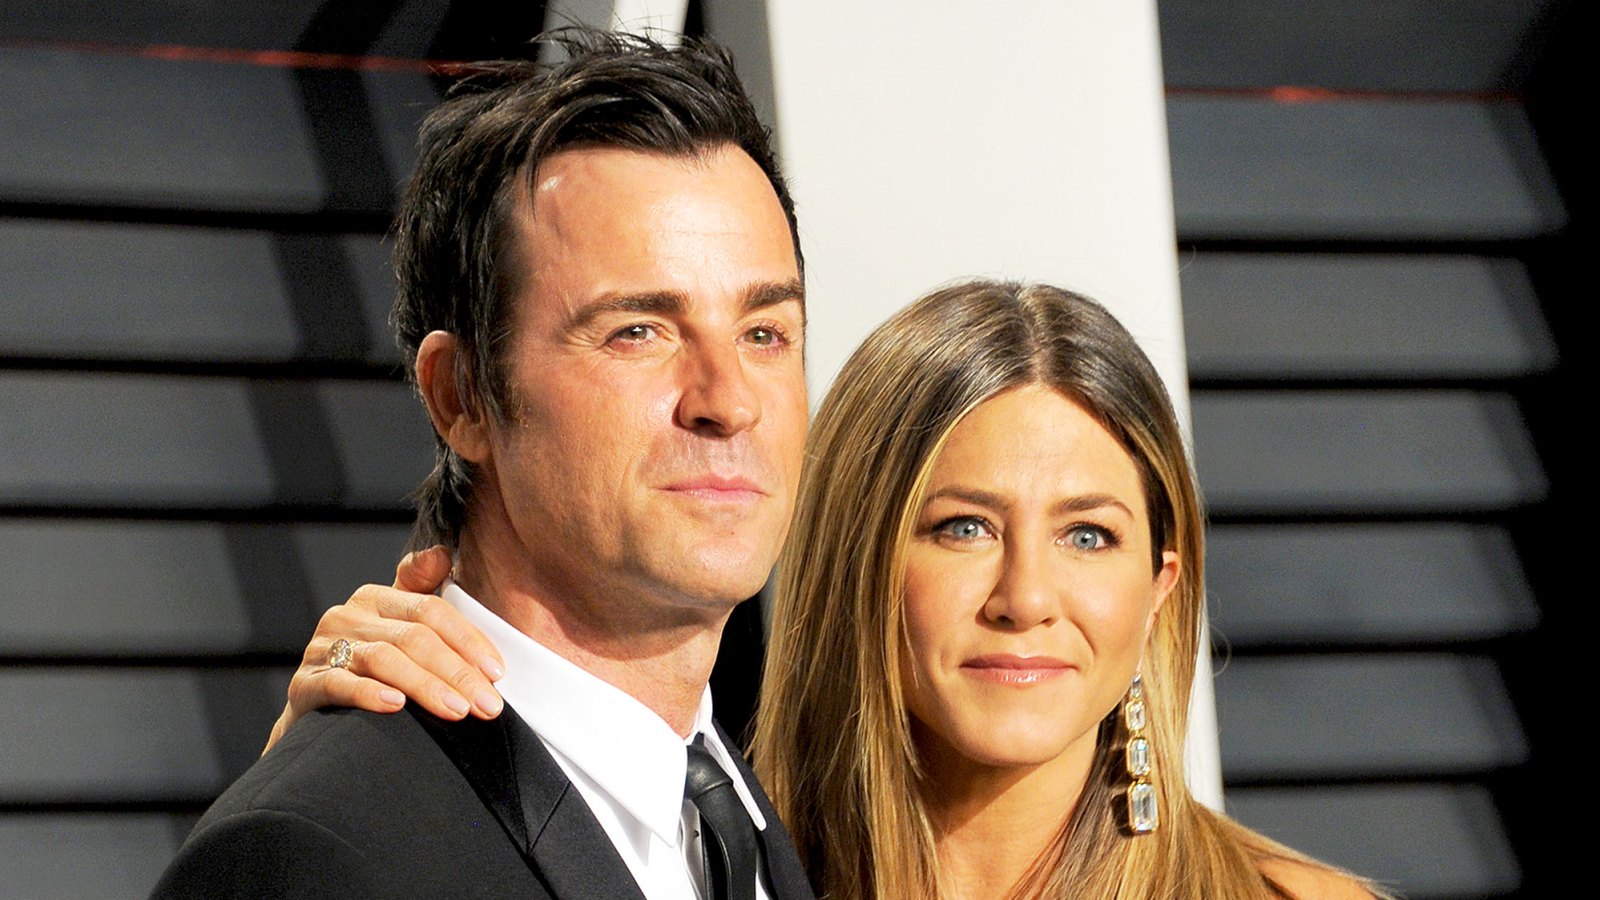 Jennifer Aniston and Justin Theroux arrive at Vanity Fair's Oscar party at Wallis Annenberg Center for the Performing Arts in Beverly Hills on February 26, 2017.